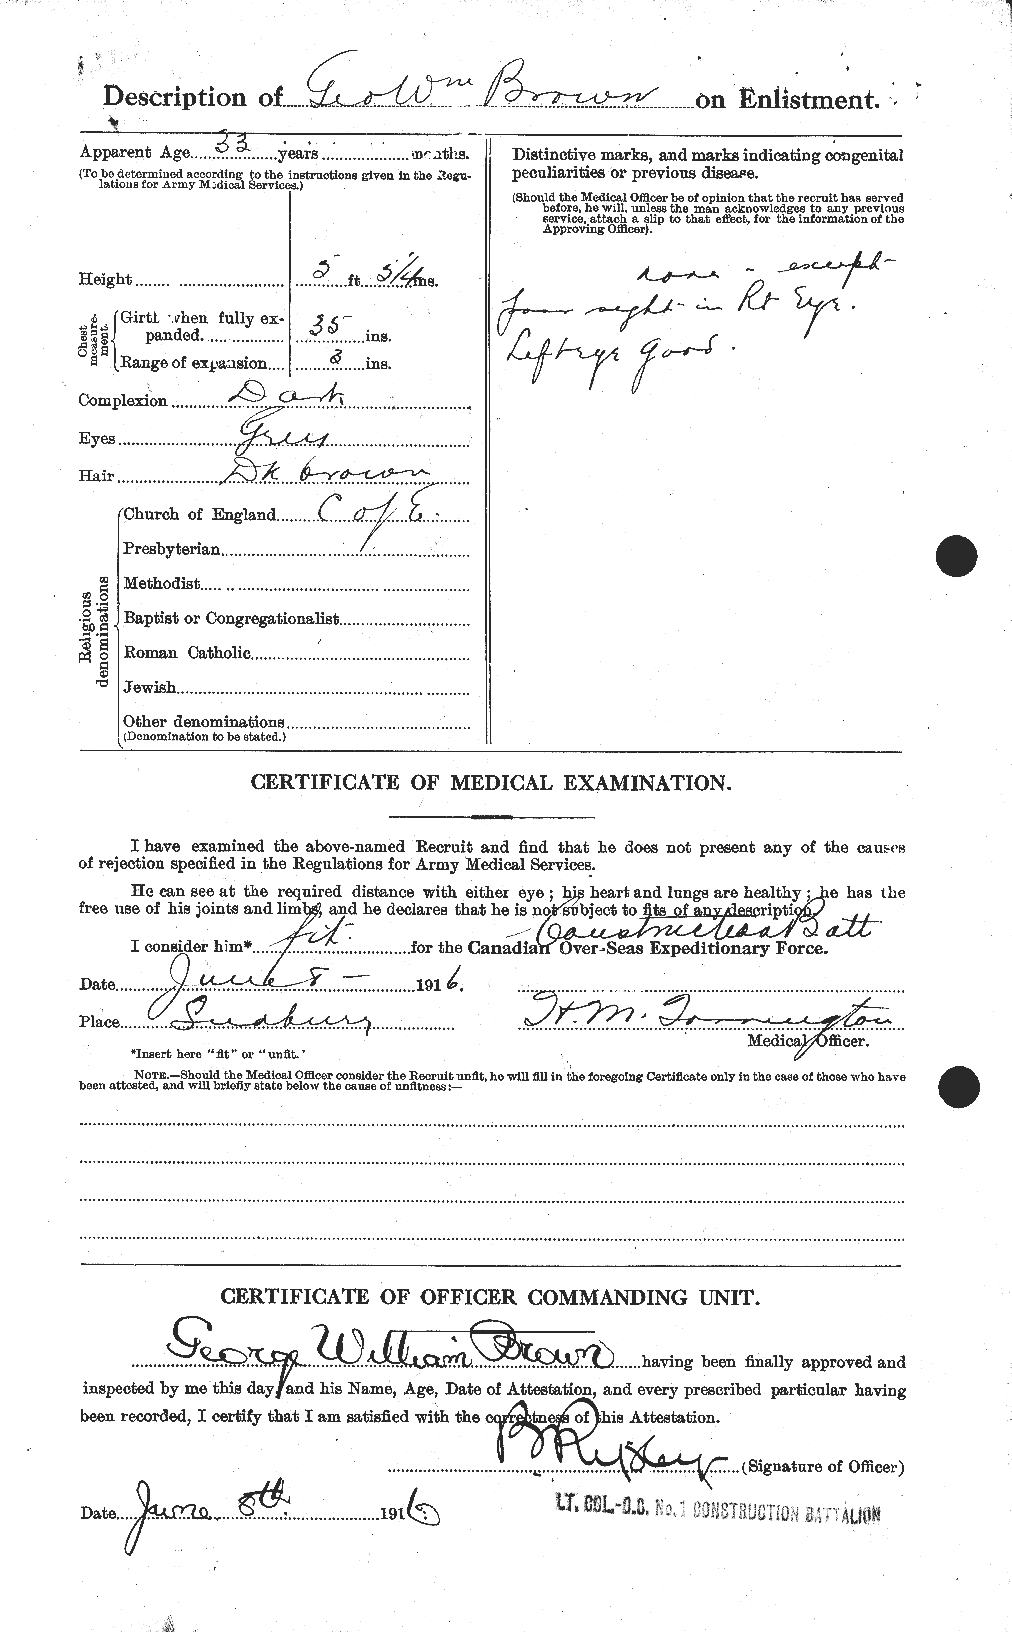 Personnel Records of the First World War - CEF 262597b